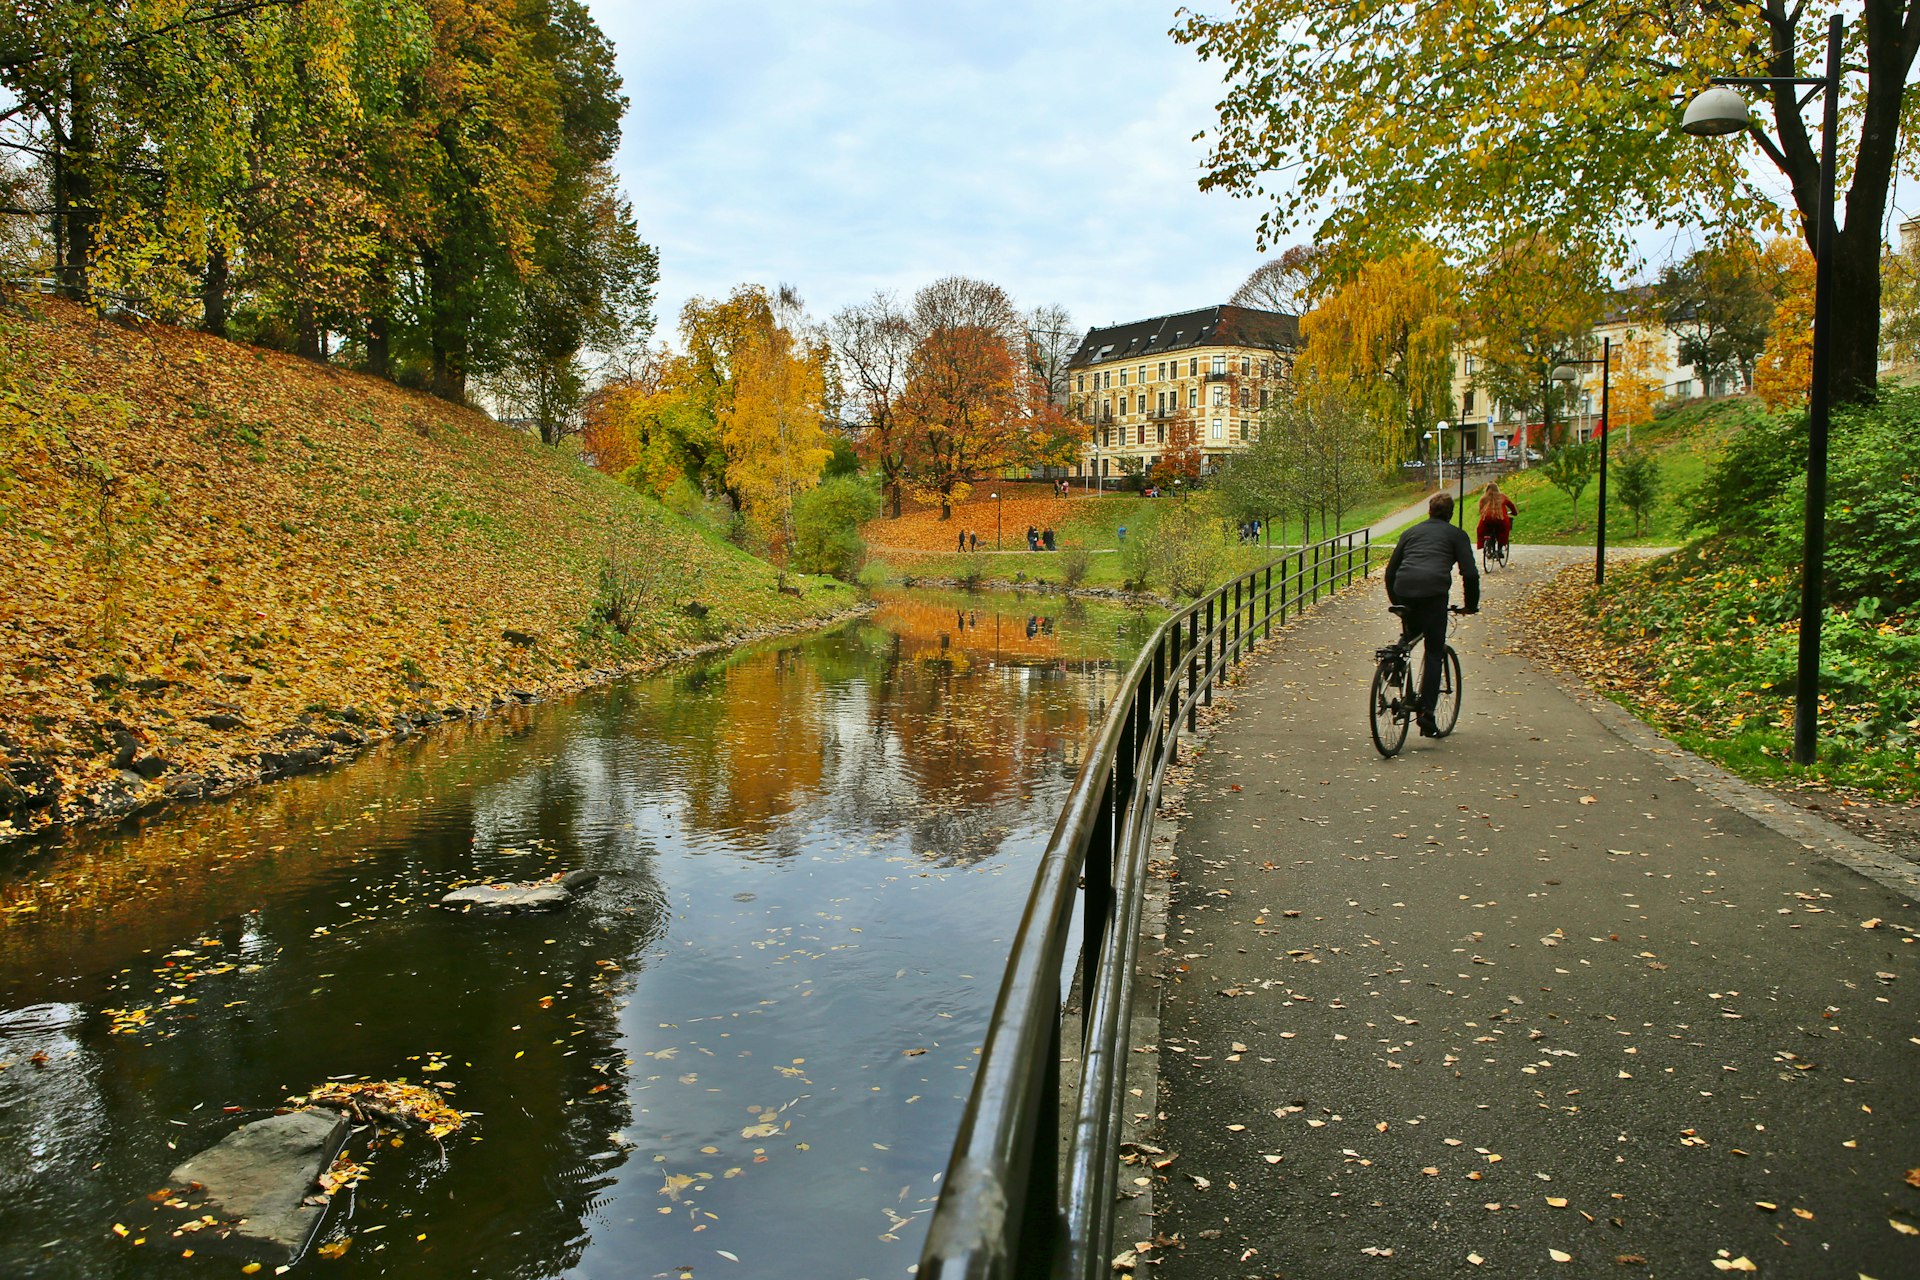 Walking path along the river in city in autumn. River Akerselva in Oslo, Norway.